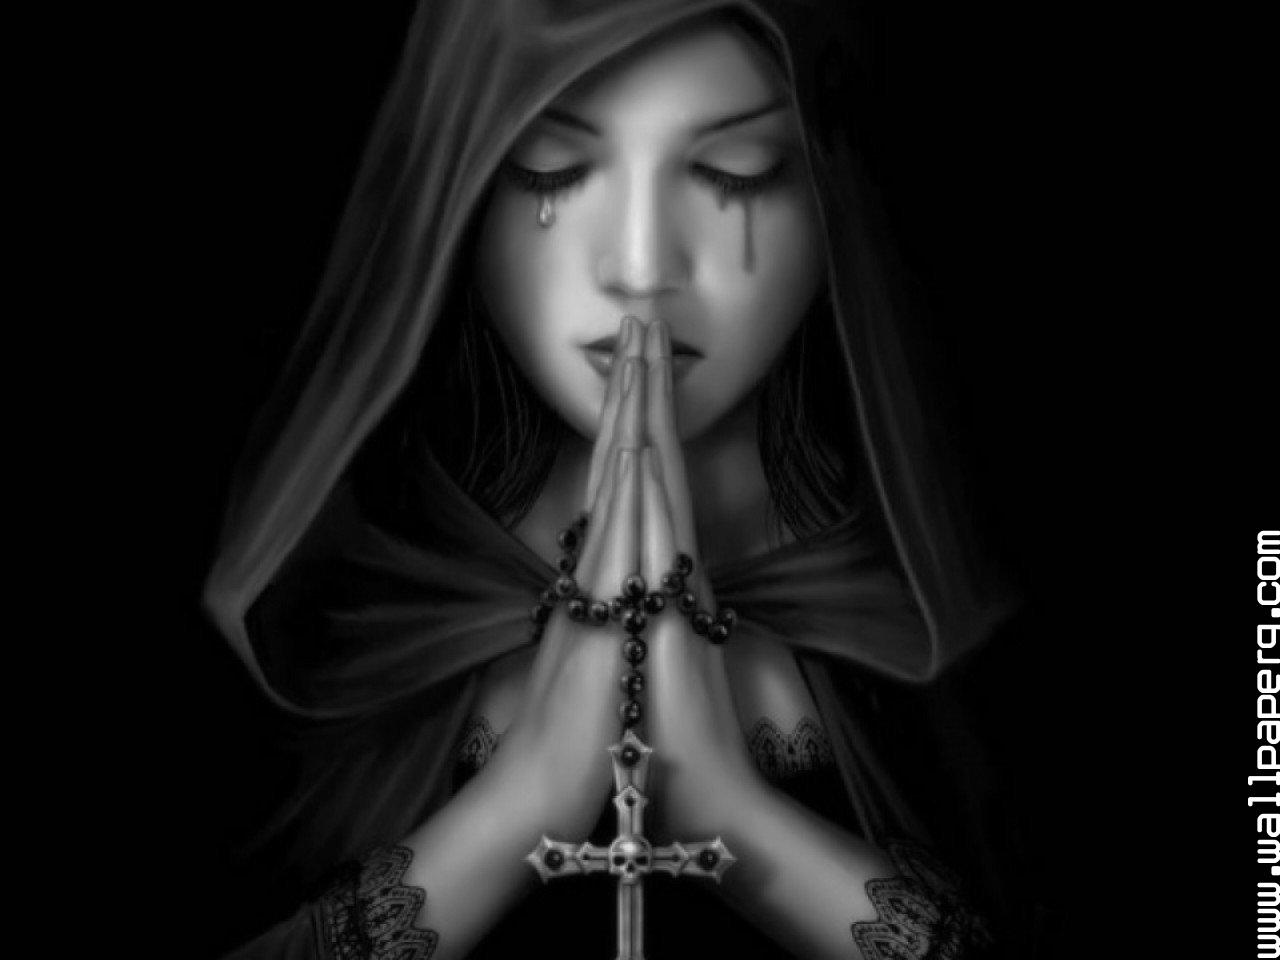 Download Gothic prayer - Cute baby profile pics- For Mobile Phone